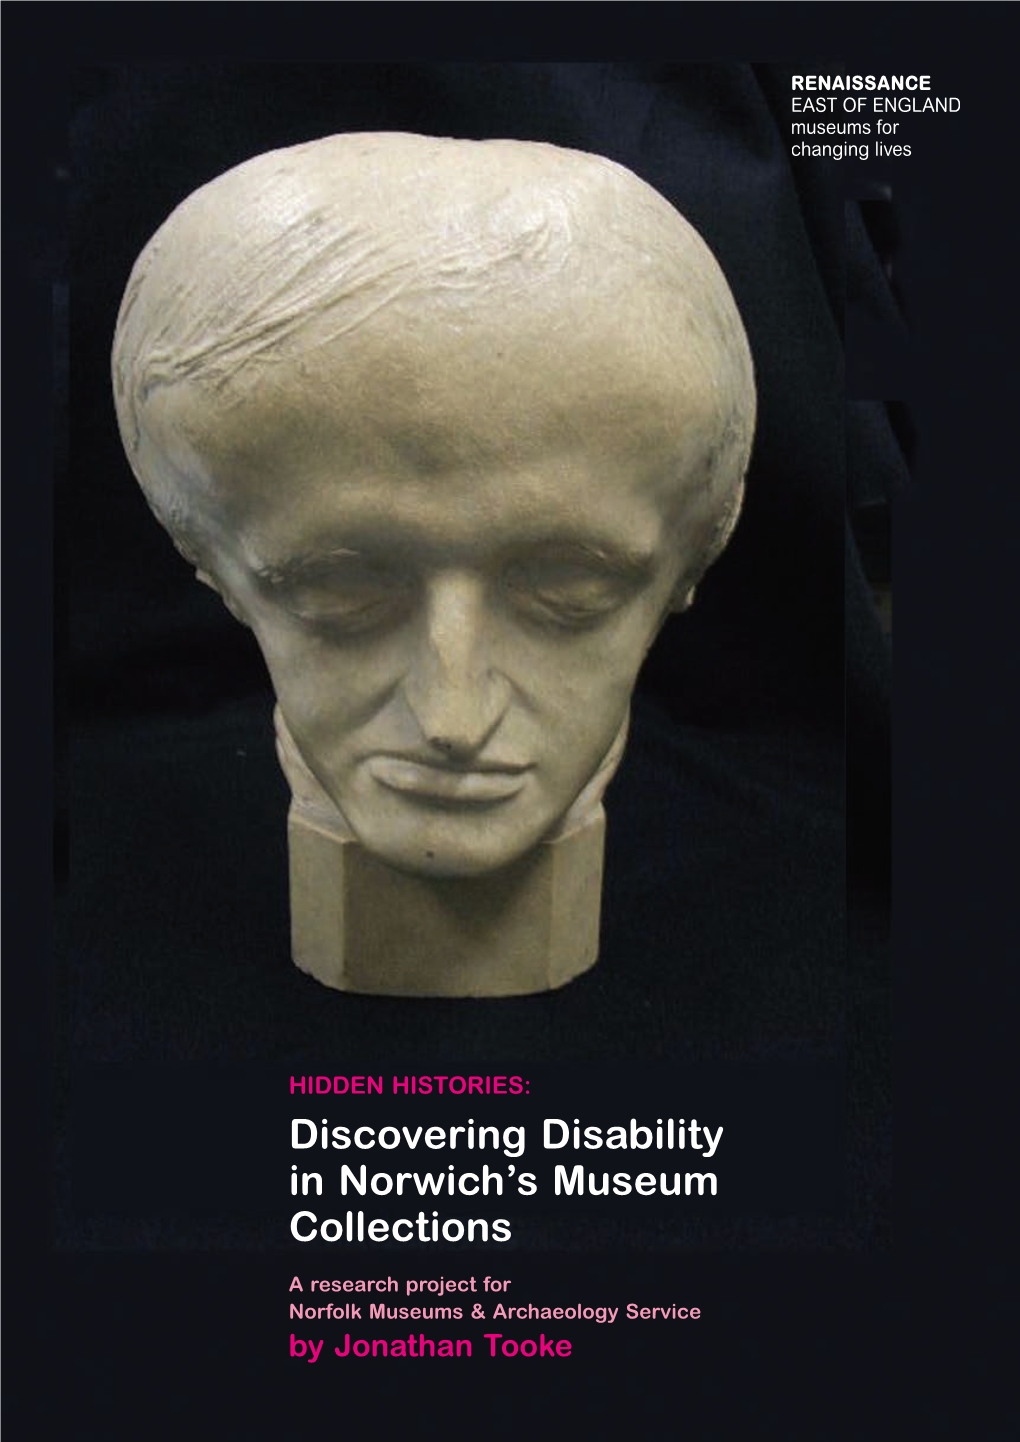 HIDDEN HISTORIES: Discovering Disability in Norwich’S Museum Collections